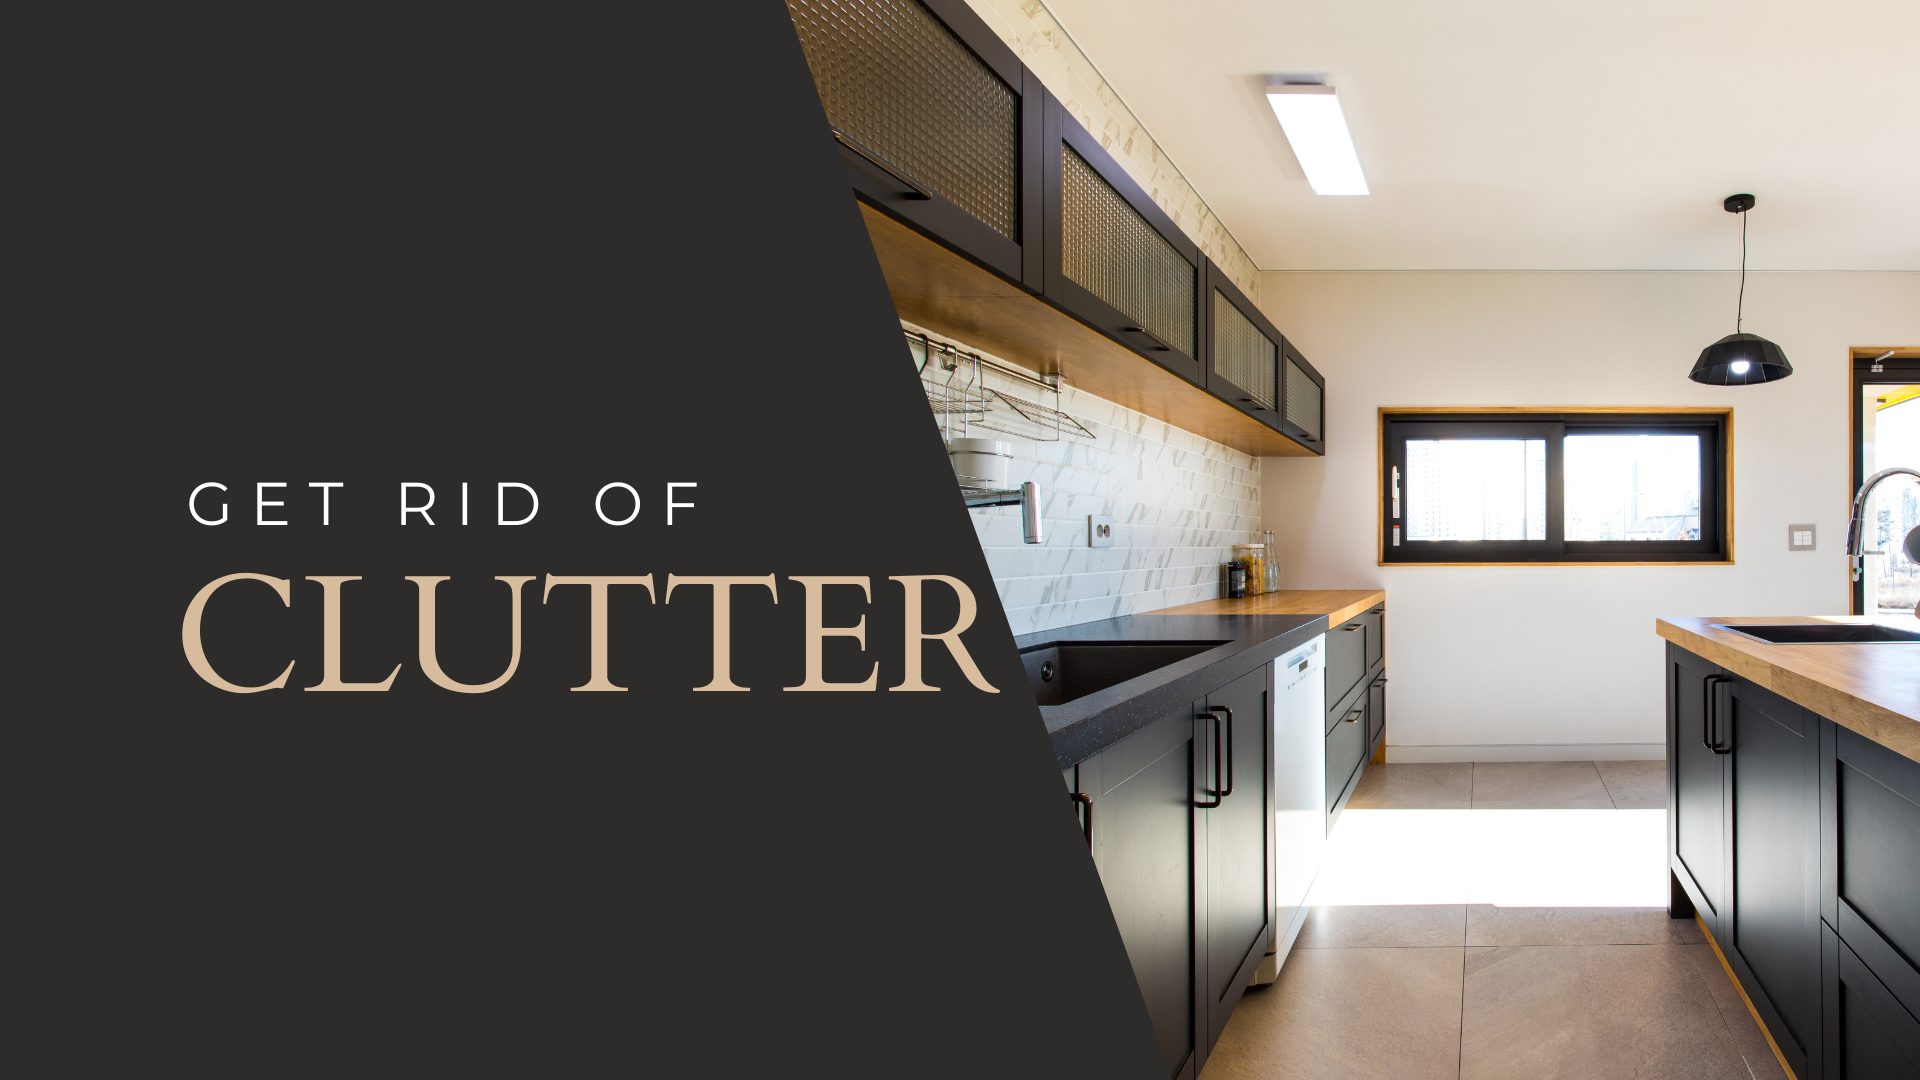 Get rid of clutter